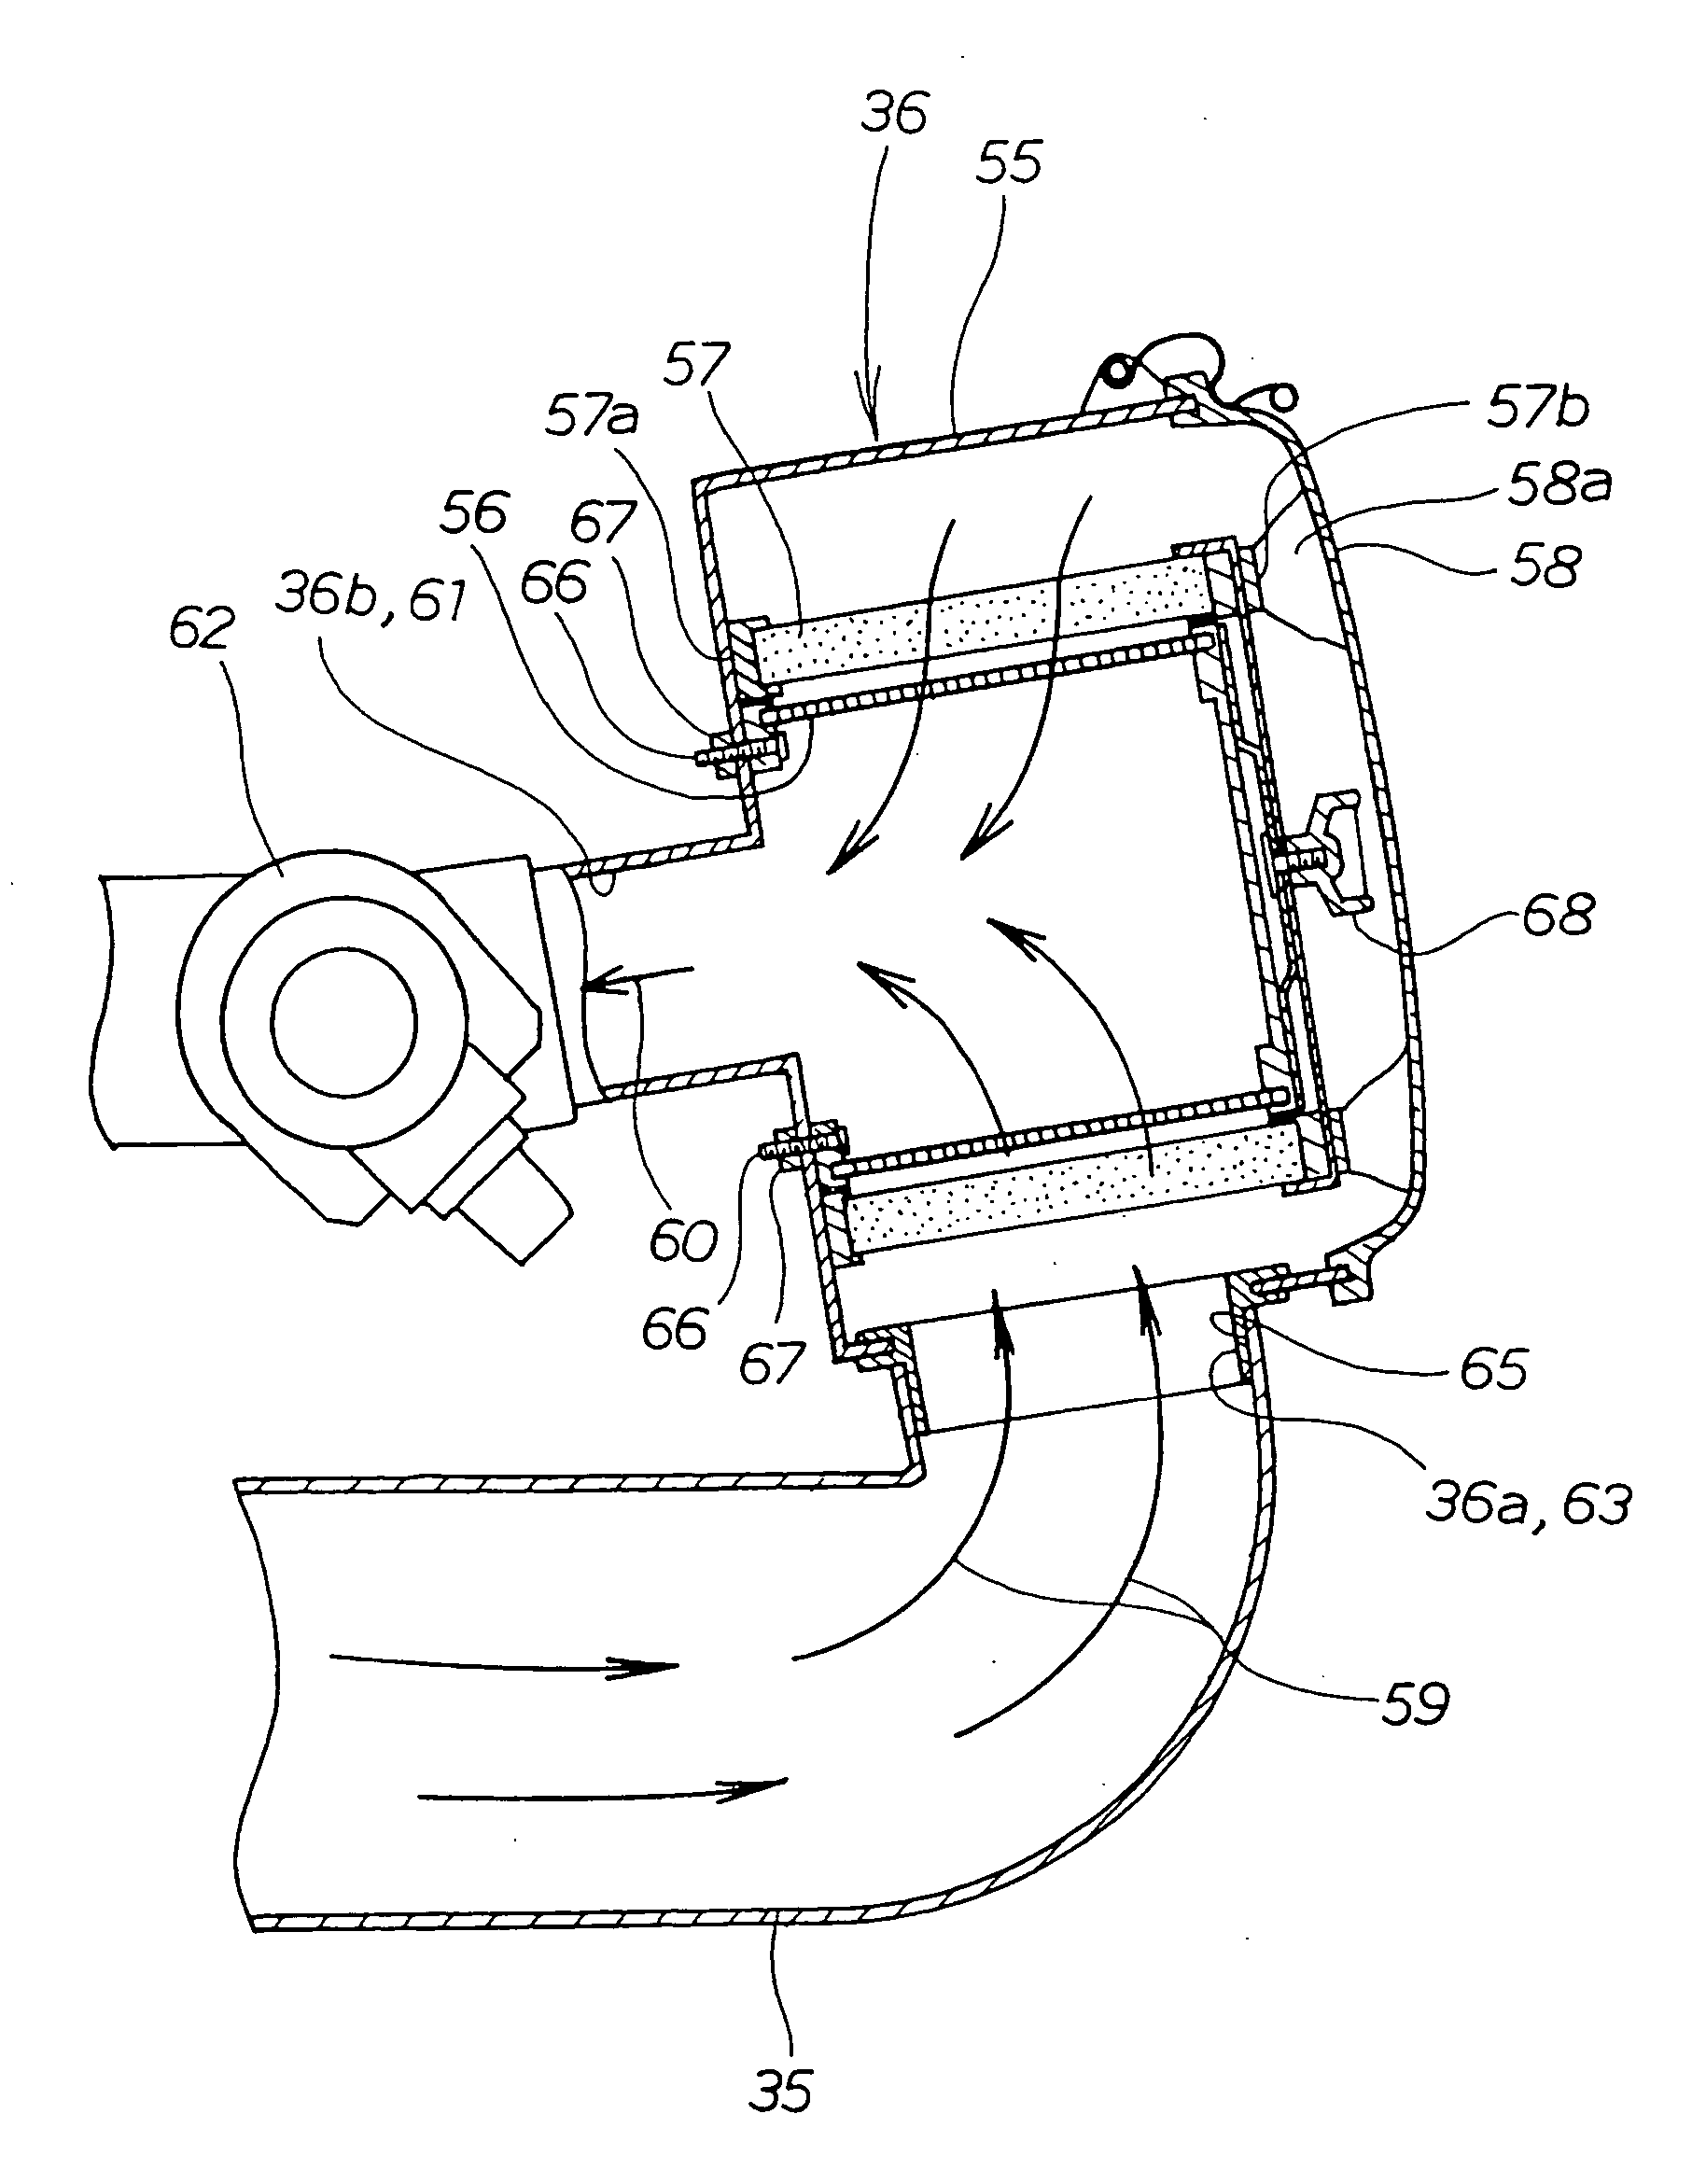 Air intake device for watercraft